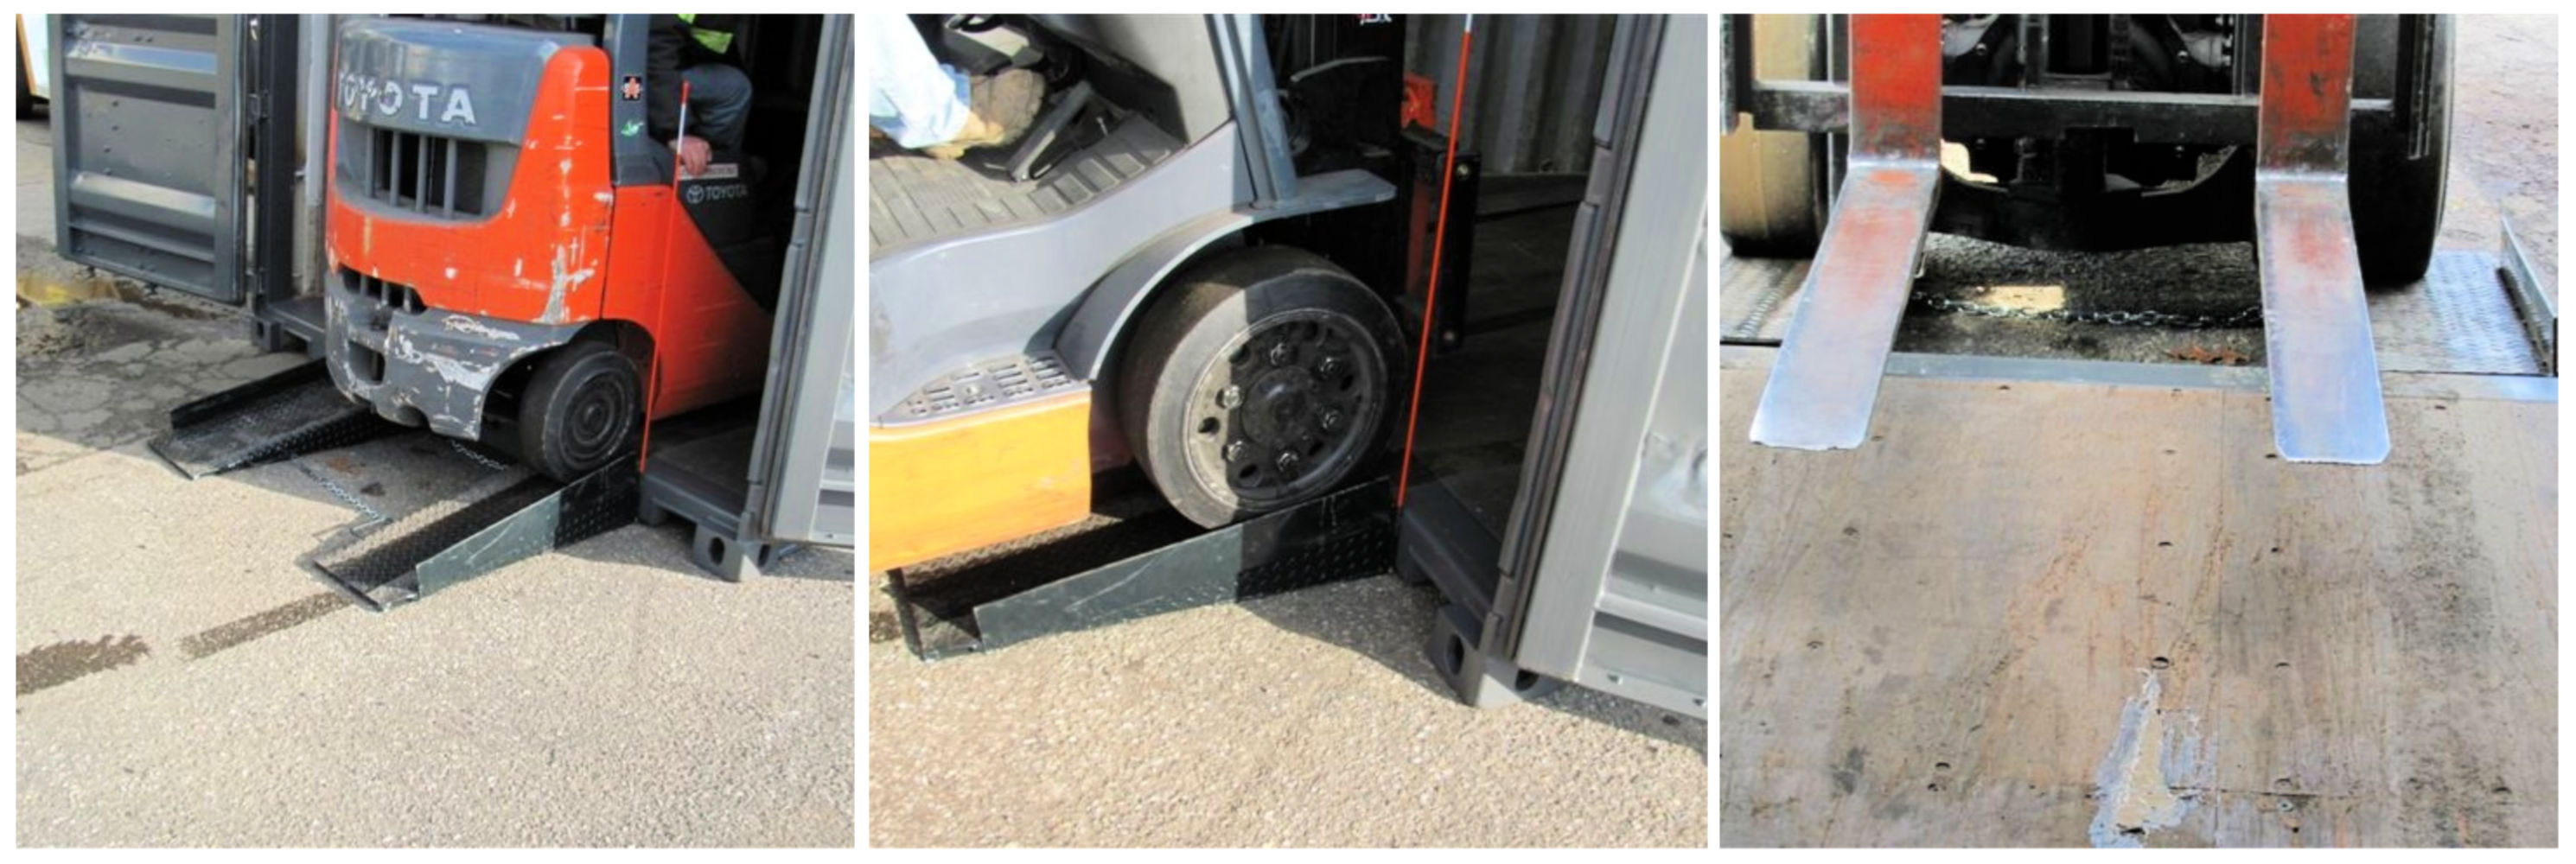 Container Ramps For Easy Loading And Unloading The Equipment Lock Company